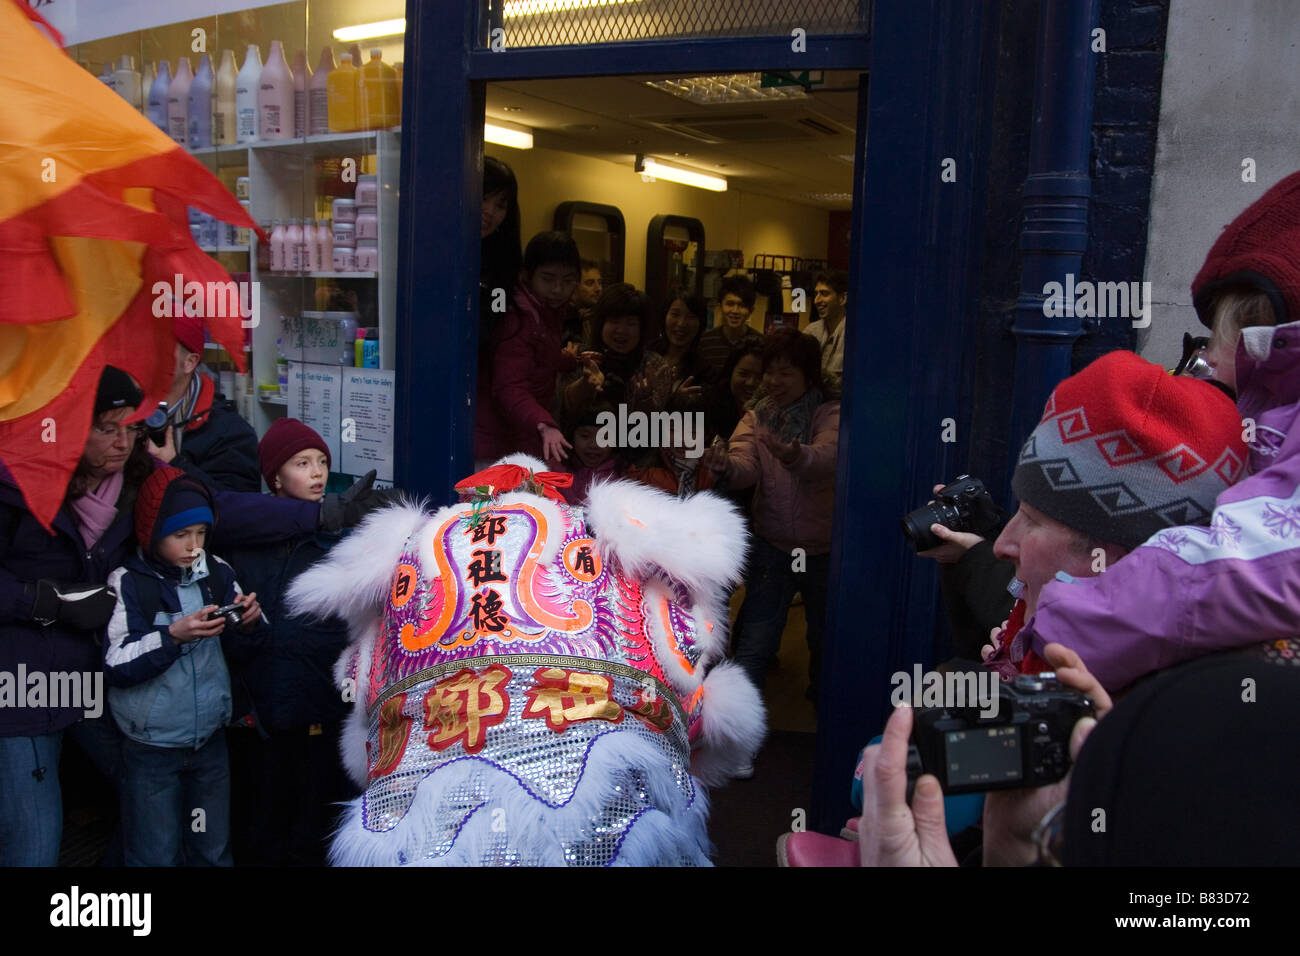 Chinese Lion in London s China Town celebrating Chinese new year Stock Photo